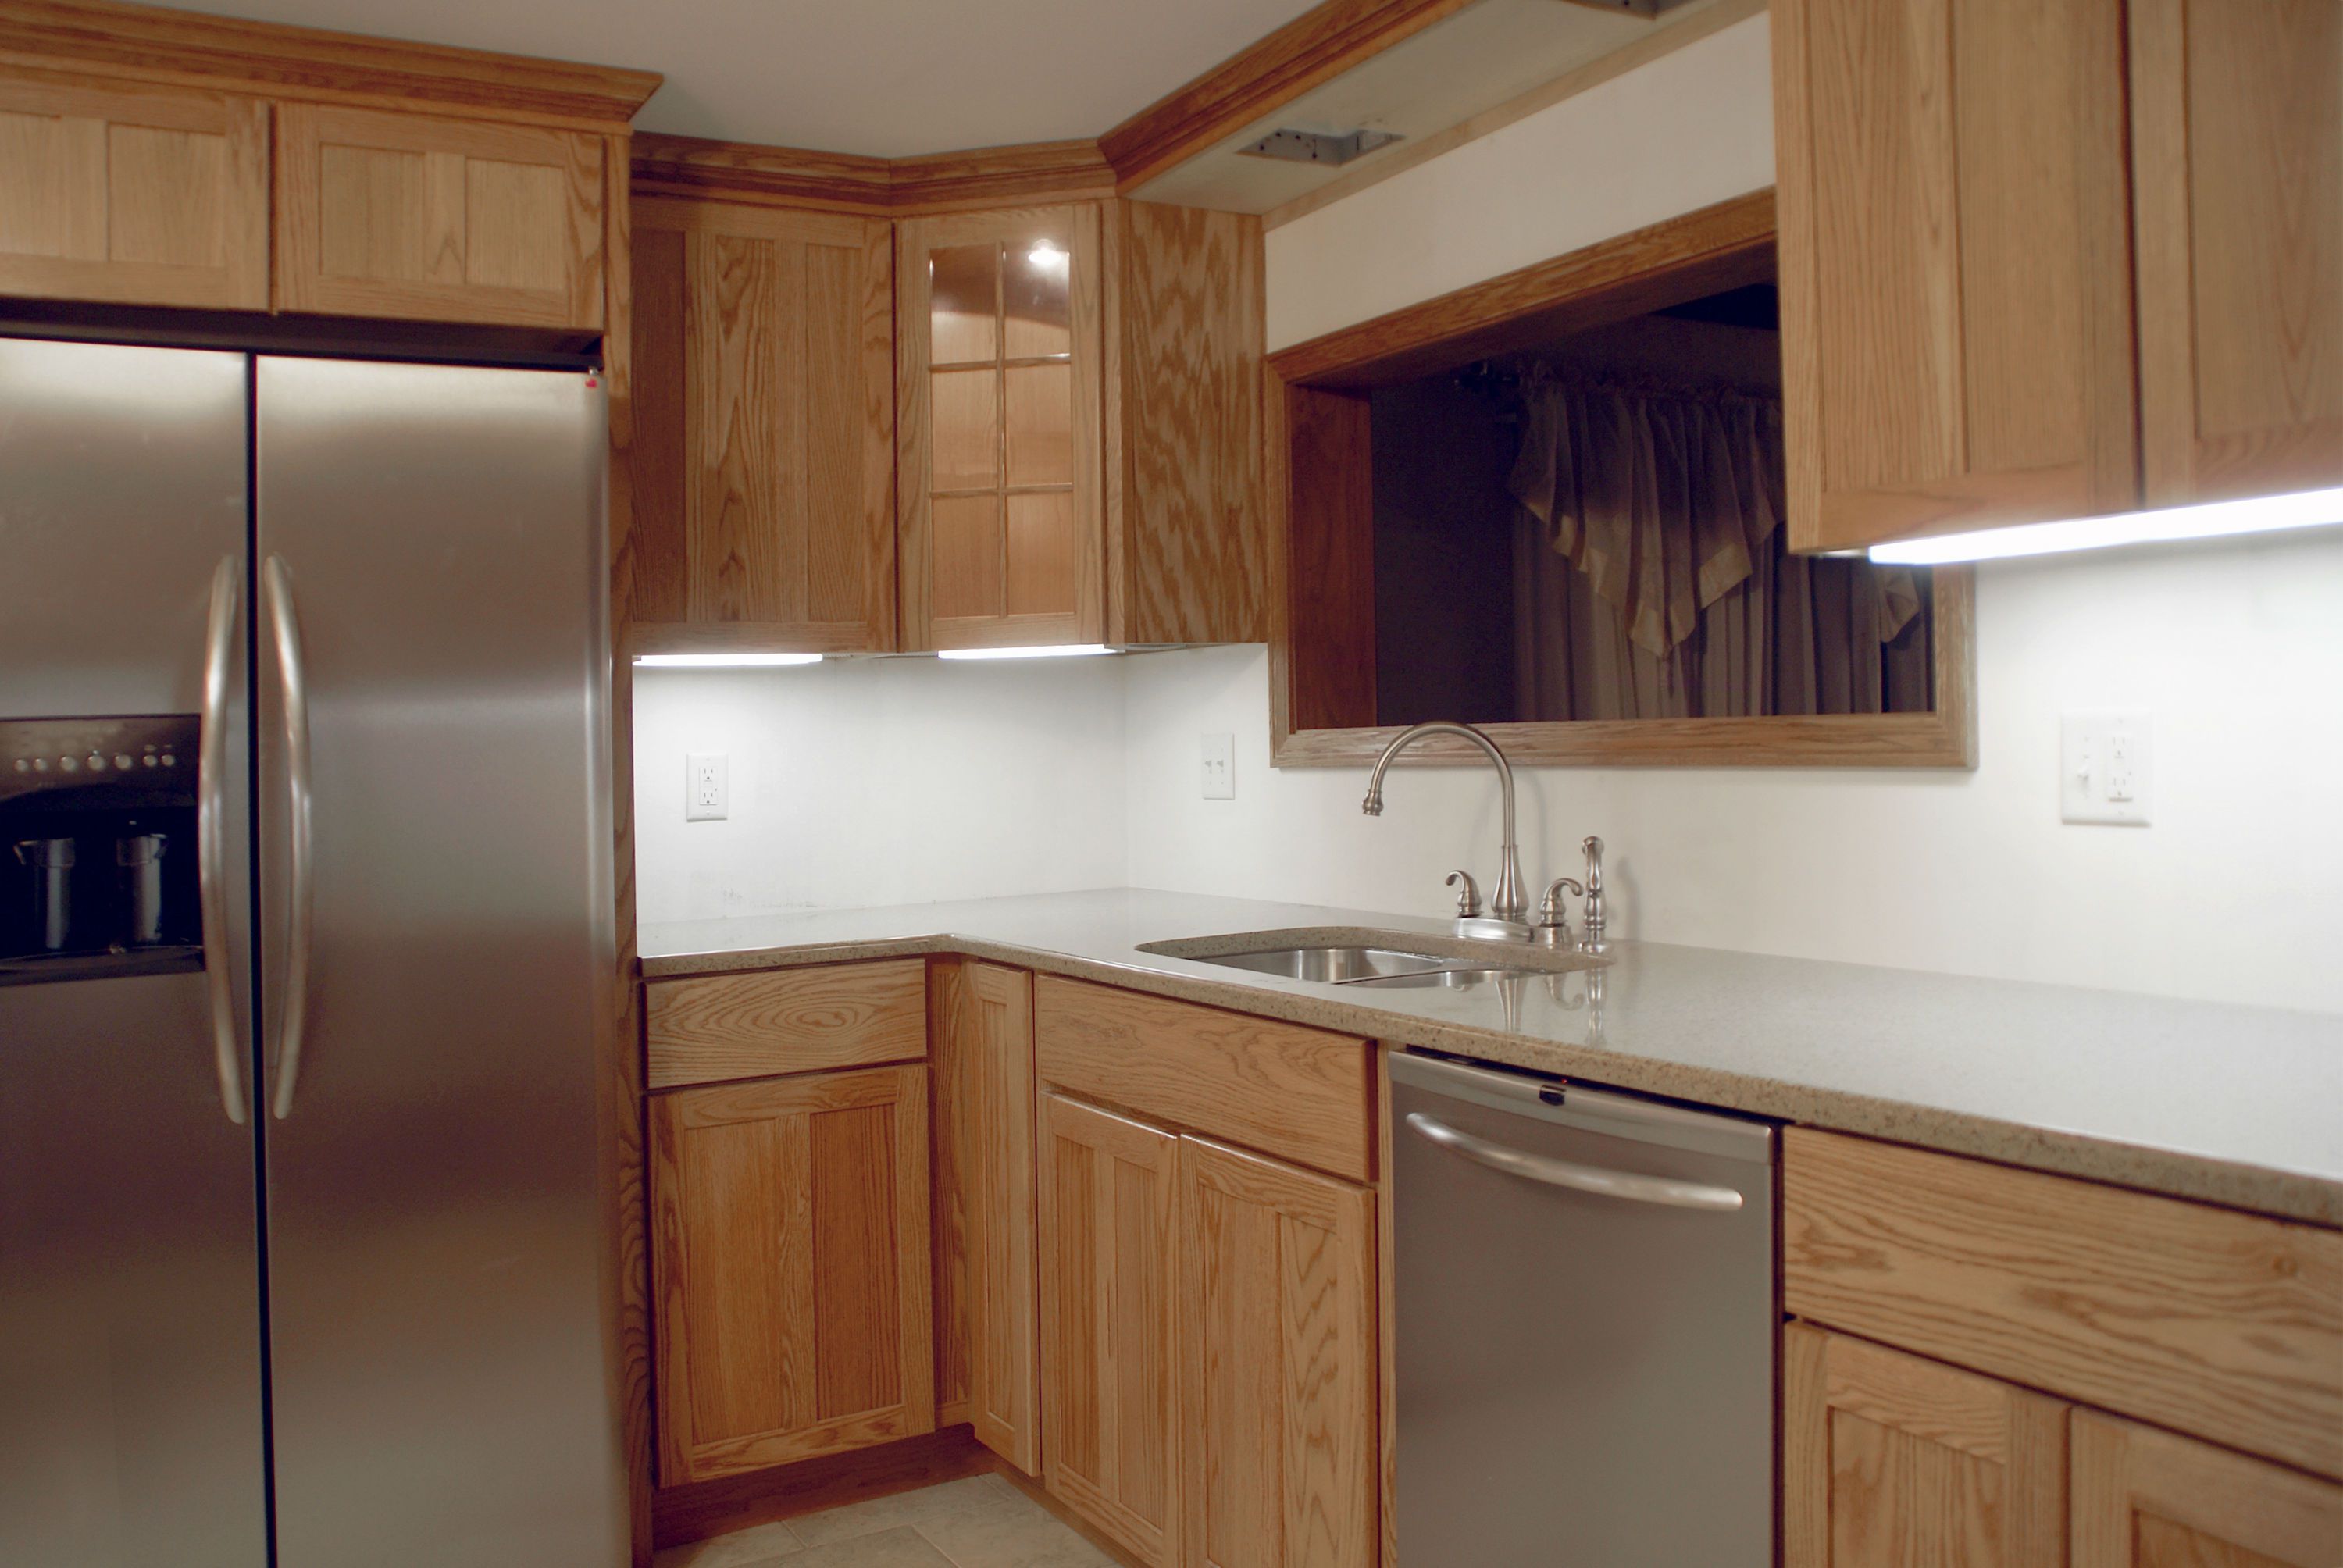 Top 15 Kitchen Cabinet Manufacturers And Retailers